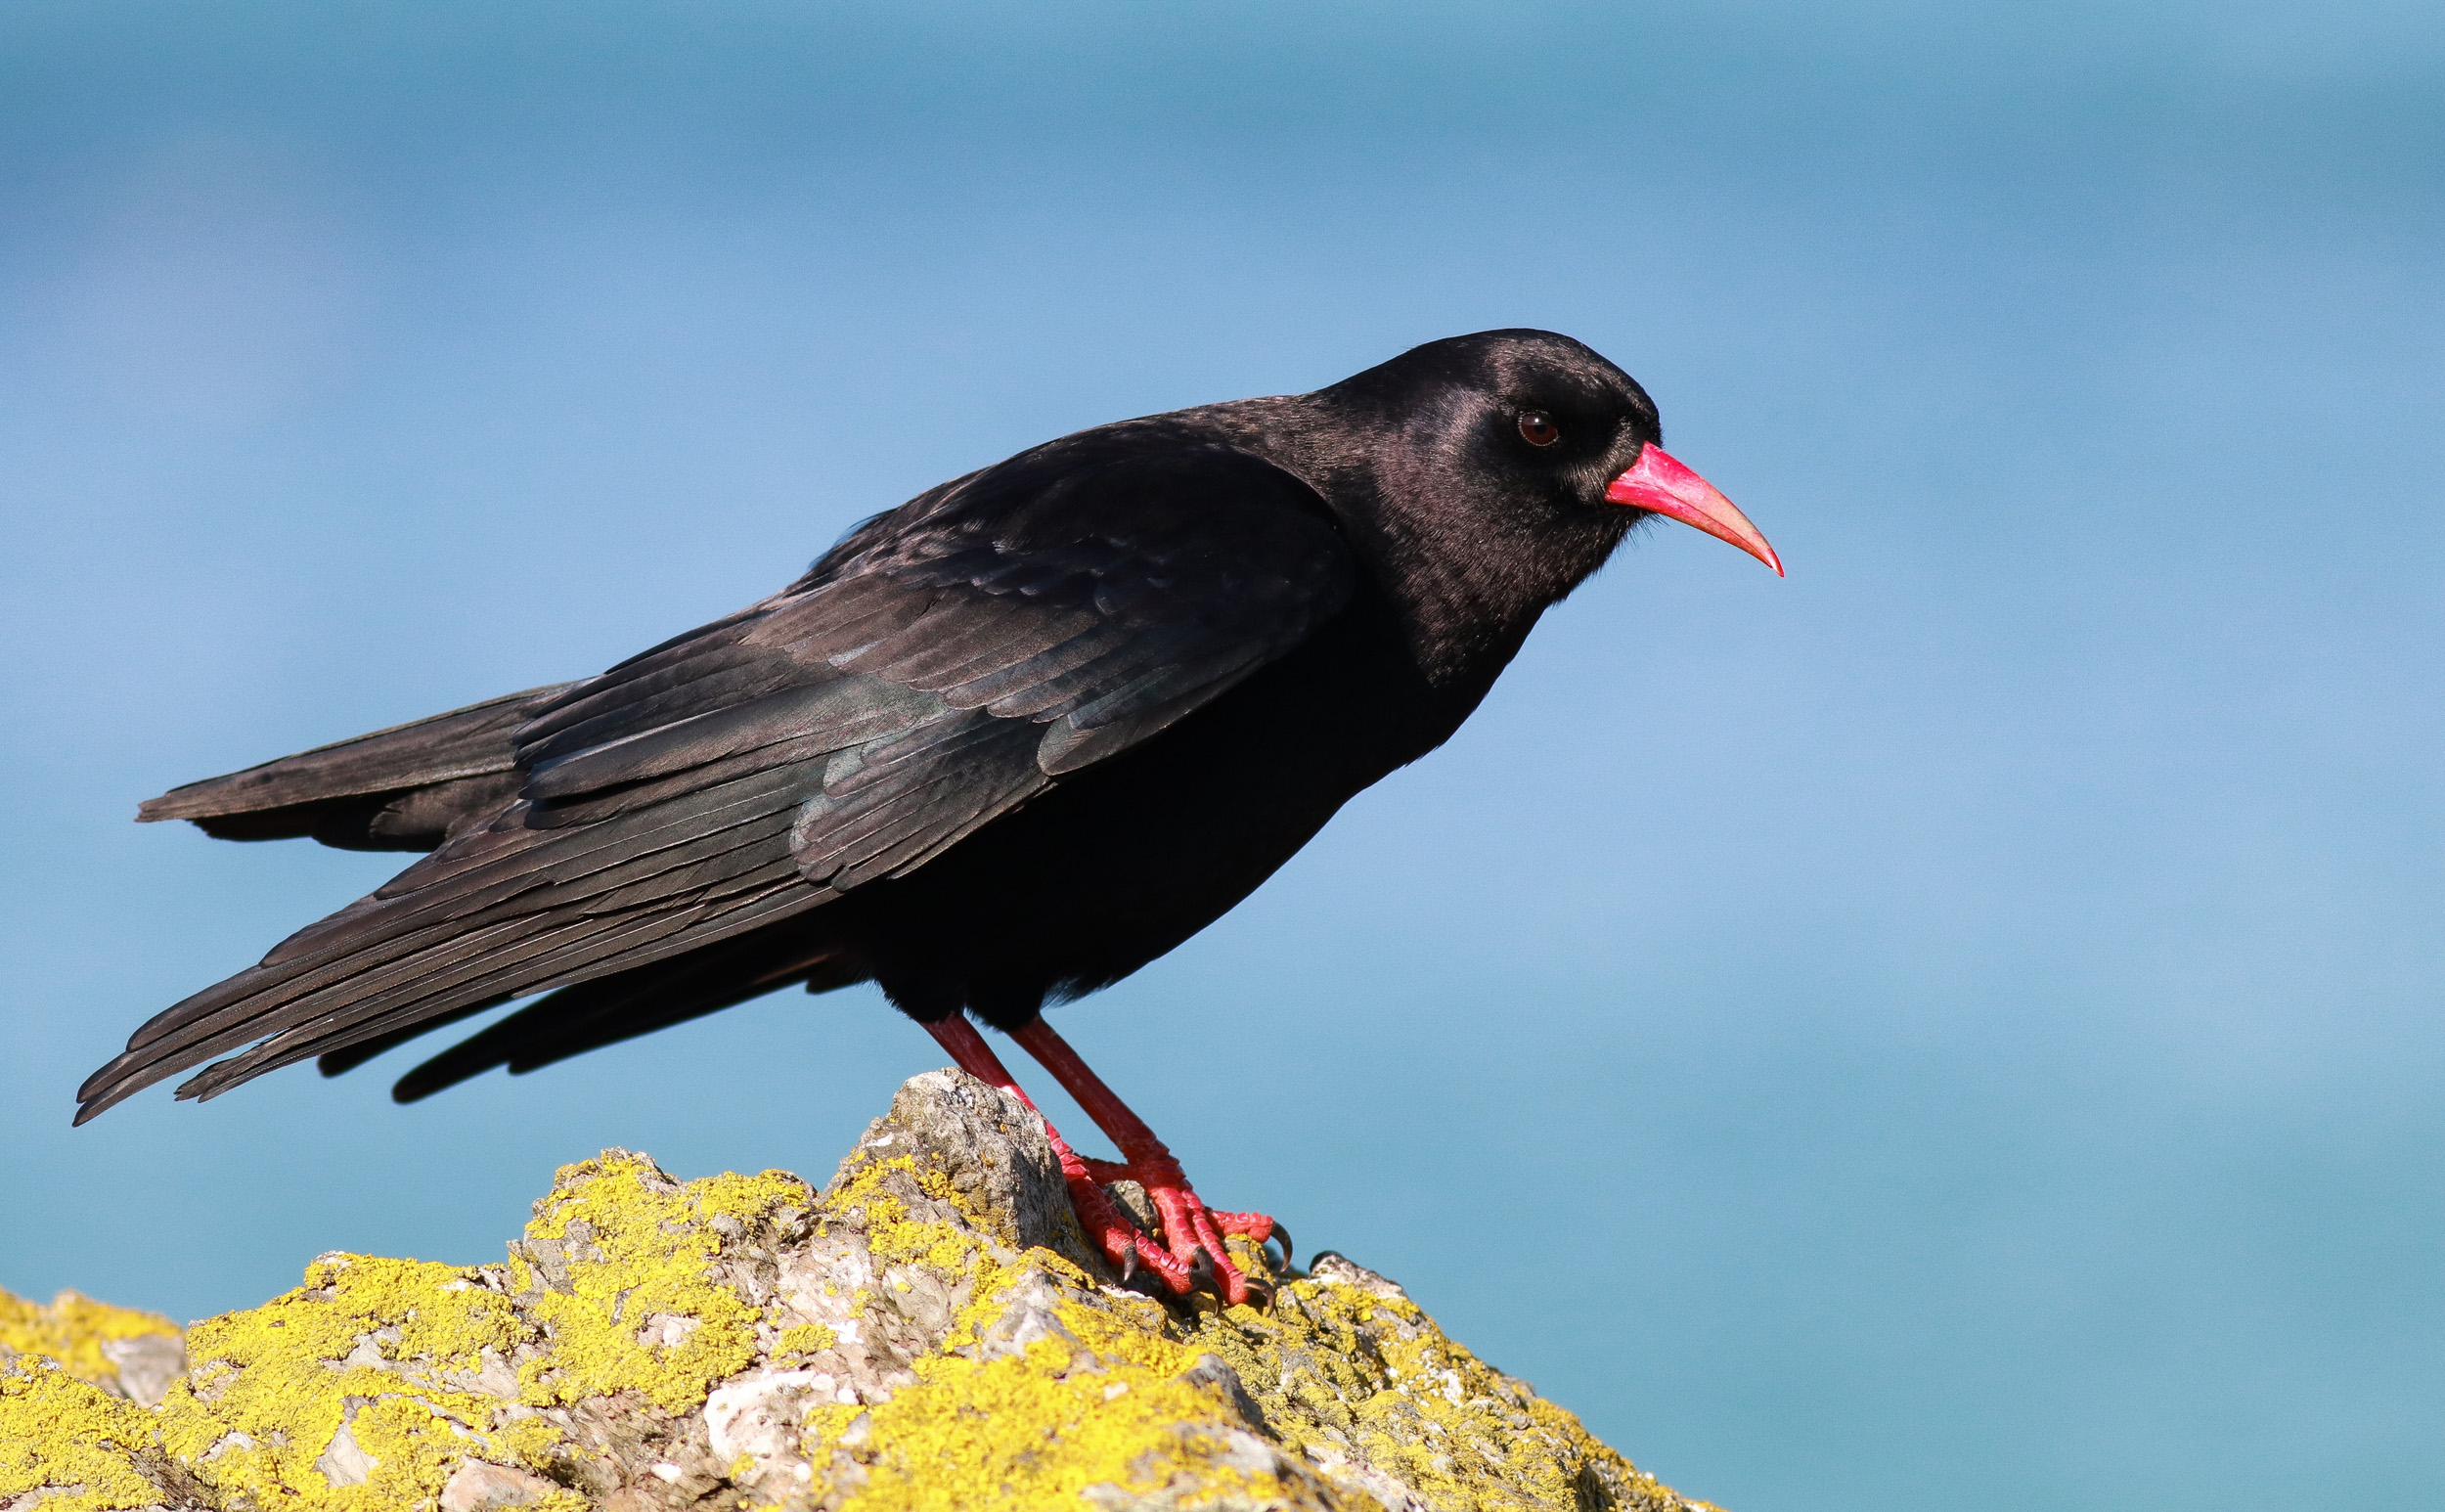 A lone Chough perched on the edge of a yellow lichen covered rock overlooking the sea.